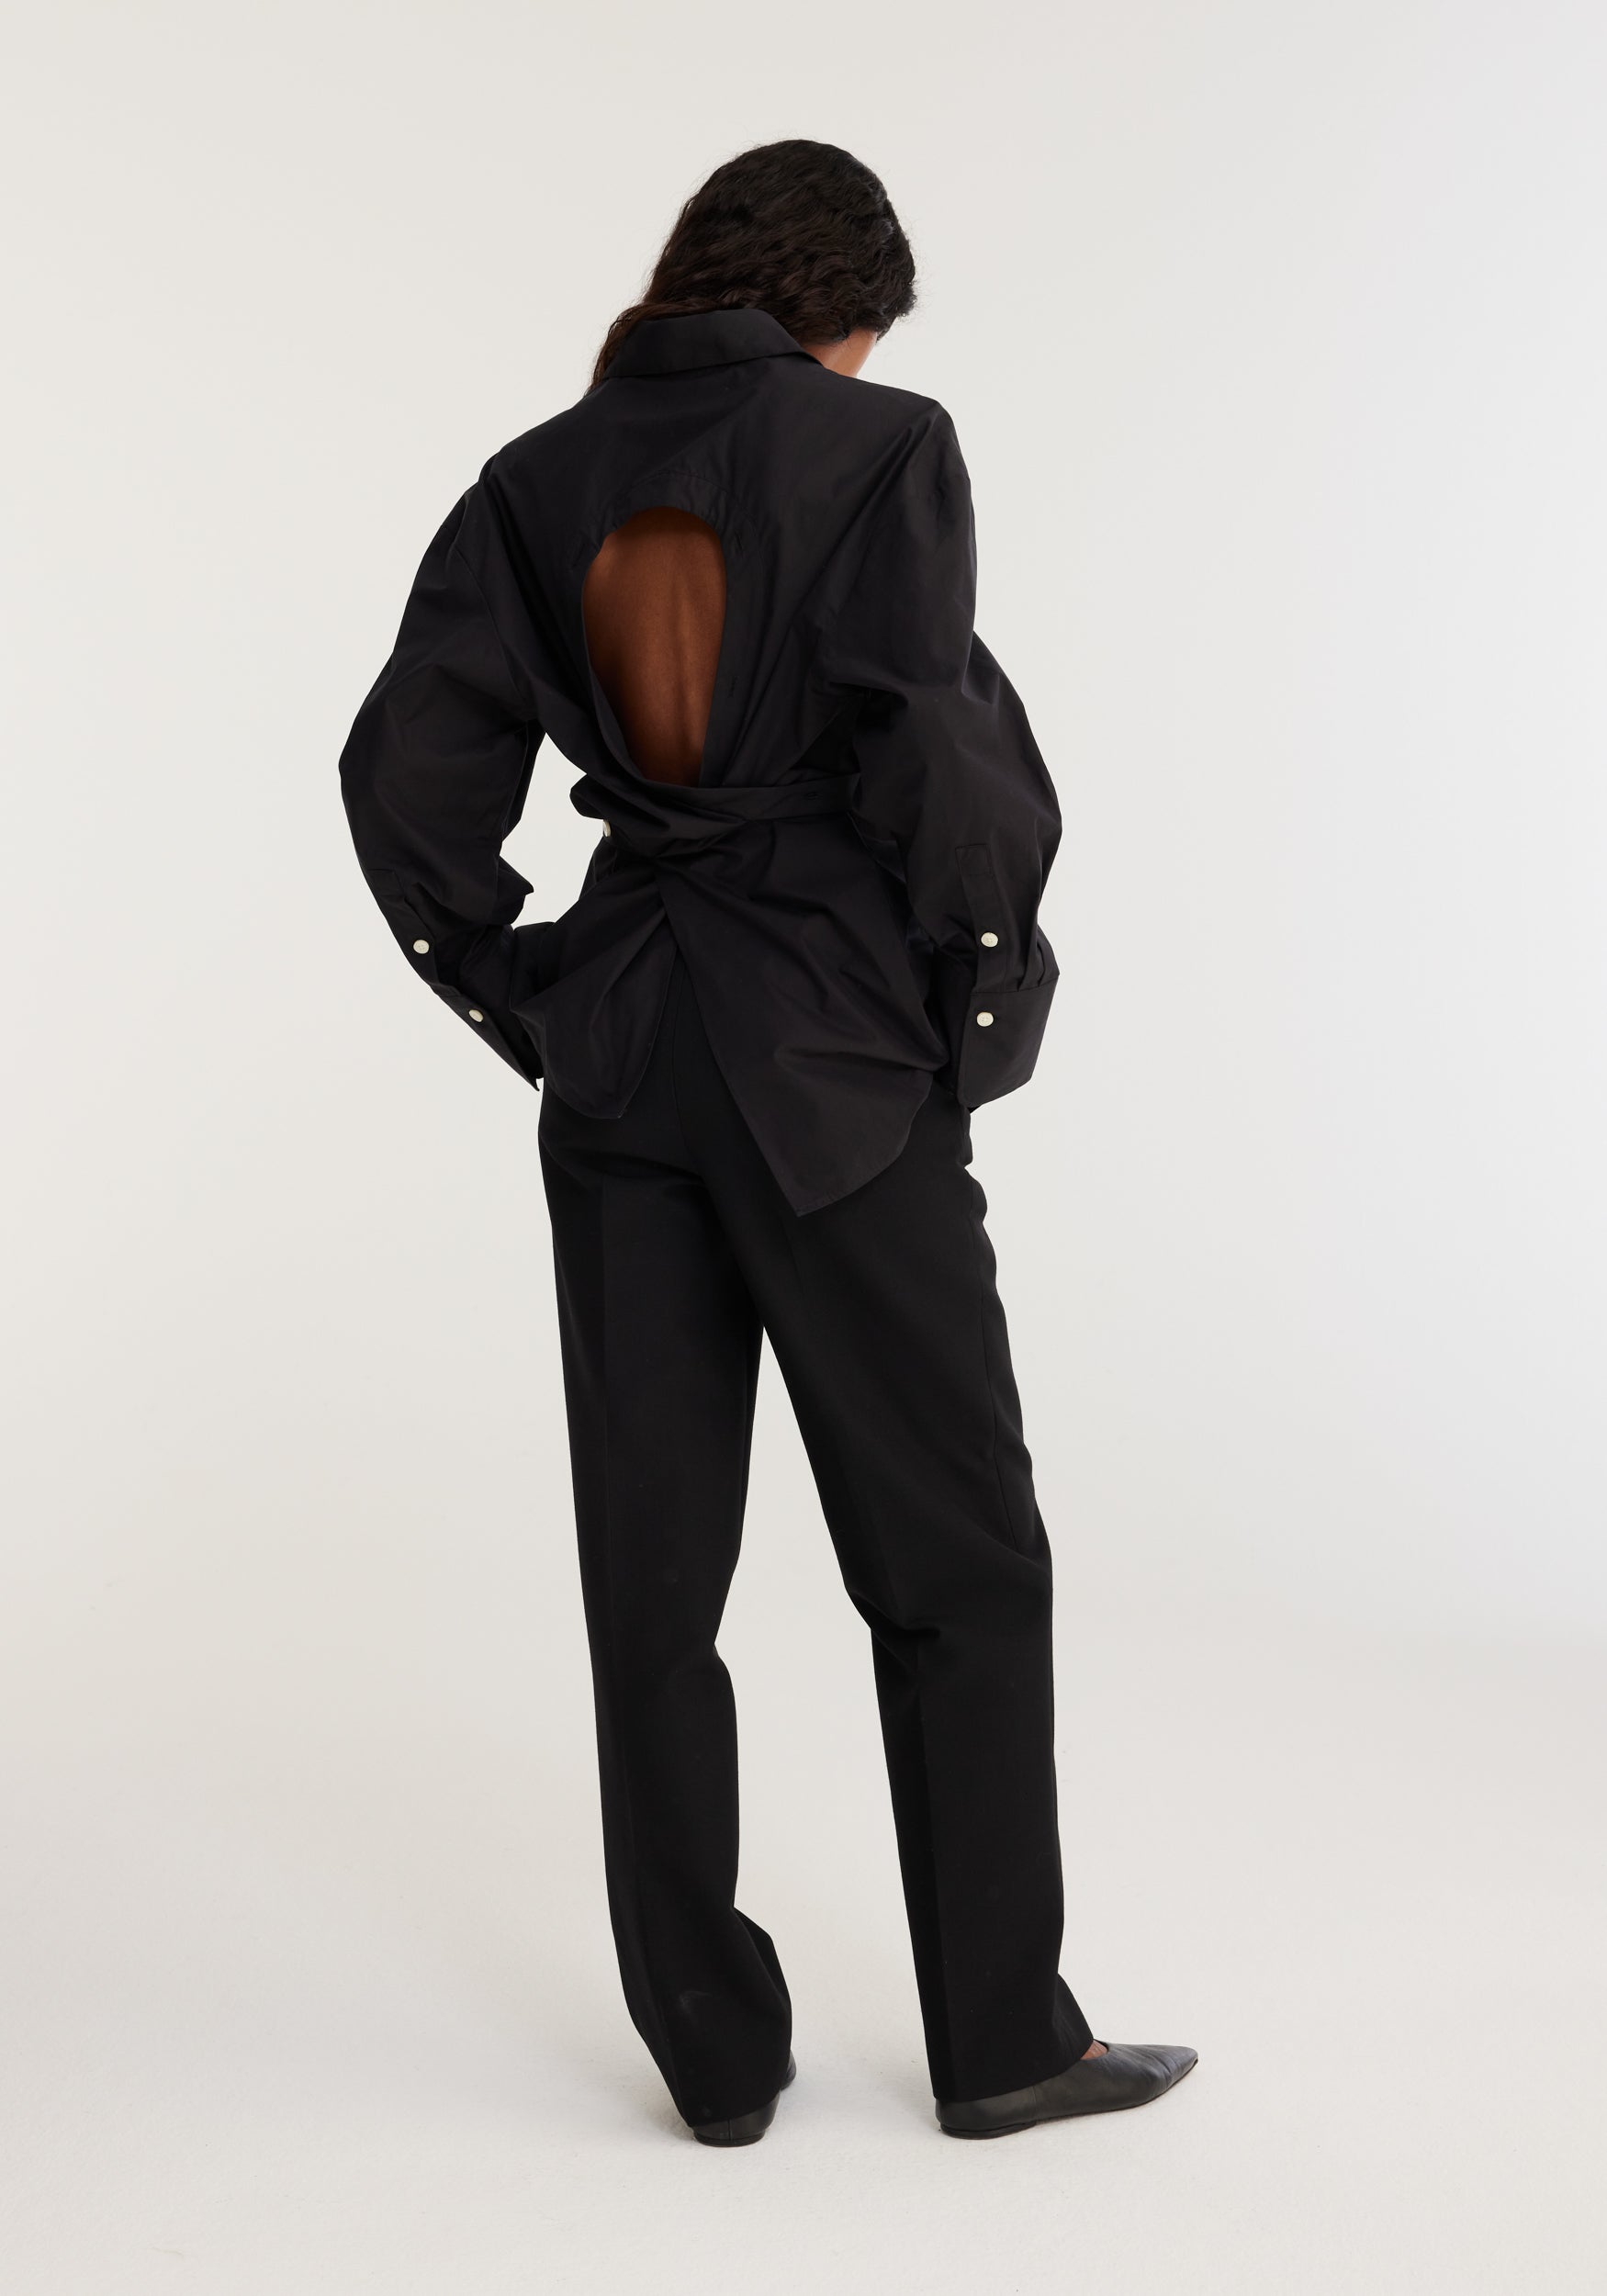 The Rohe Open Back Shirt in Noir available at The New Trend Australia